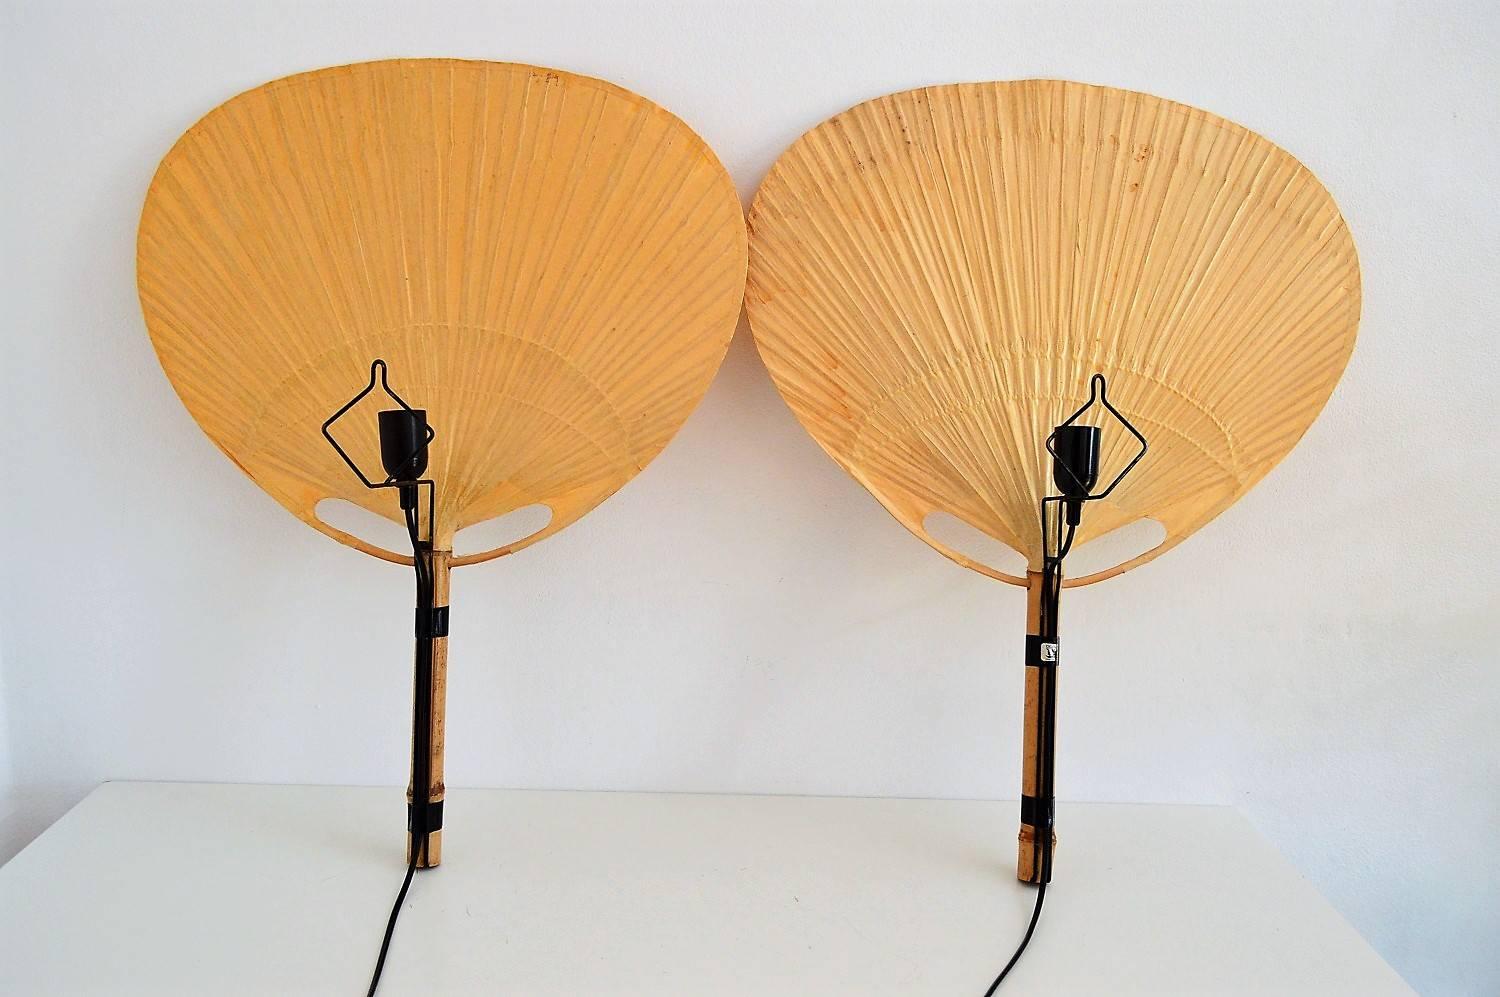 Two pieces of Ingo Maurer big Uchiwa fan lamps with metal holder for wall hanging.
All fans are made of bamboo and rice paper.
The metal holders are equipped with original Edison bulb holders.
The lamps are equipped with black rubber cable for